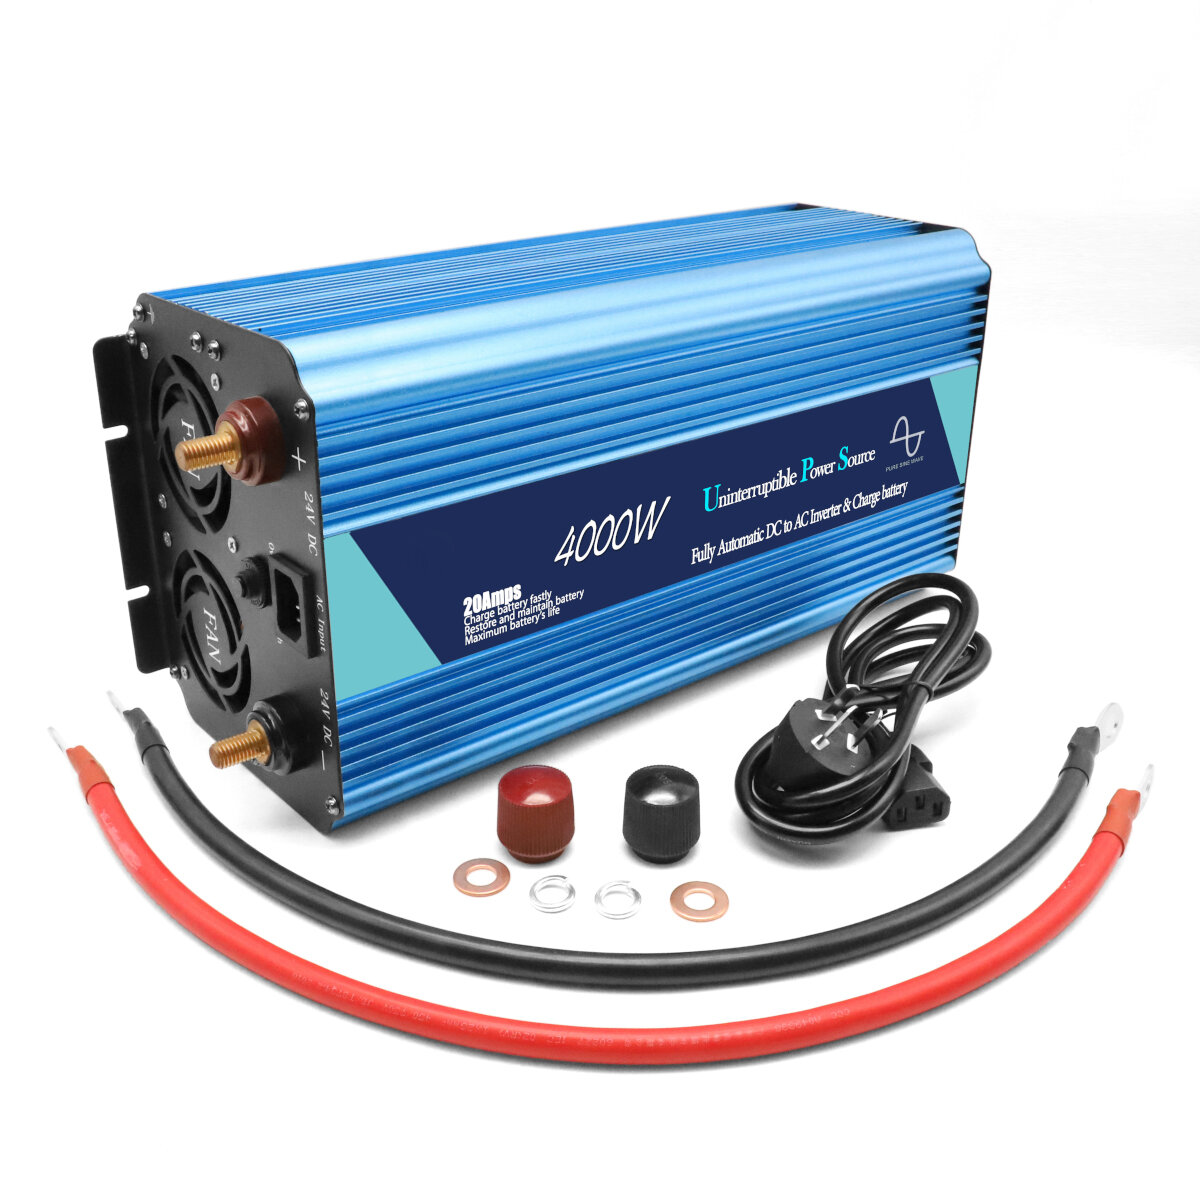 

BELTTT BET1500S 2000S 3000/4000W 12V/24V To 220V/110V Pure Sine Wave Power Inverter Battery Charger UPS Converter LCD Di